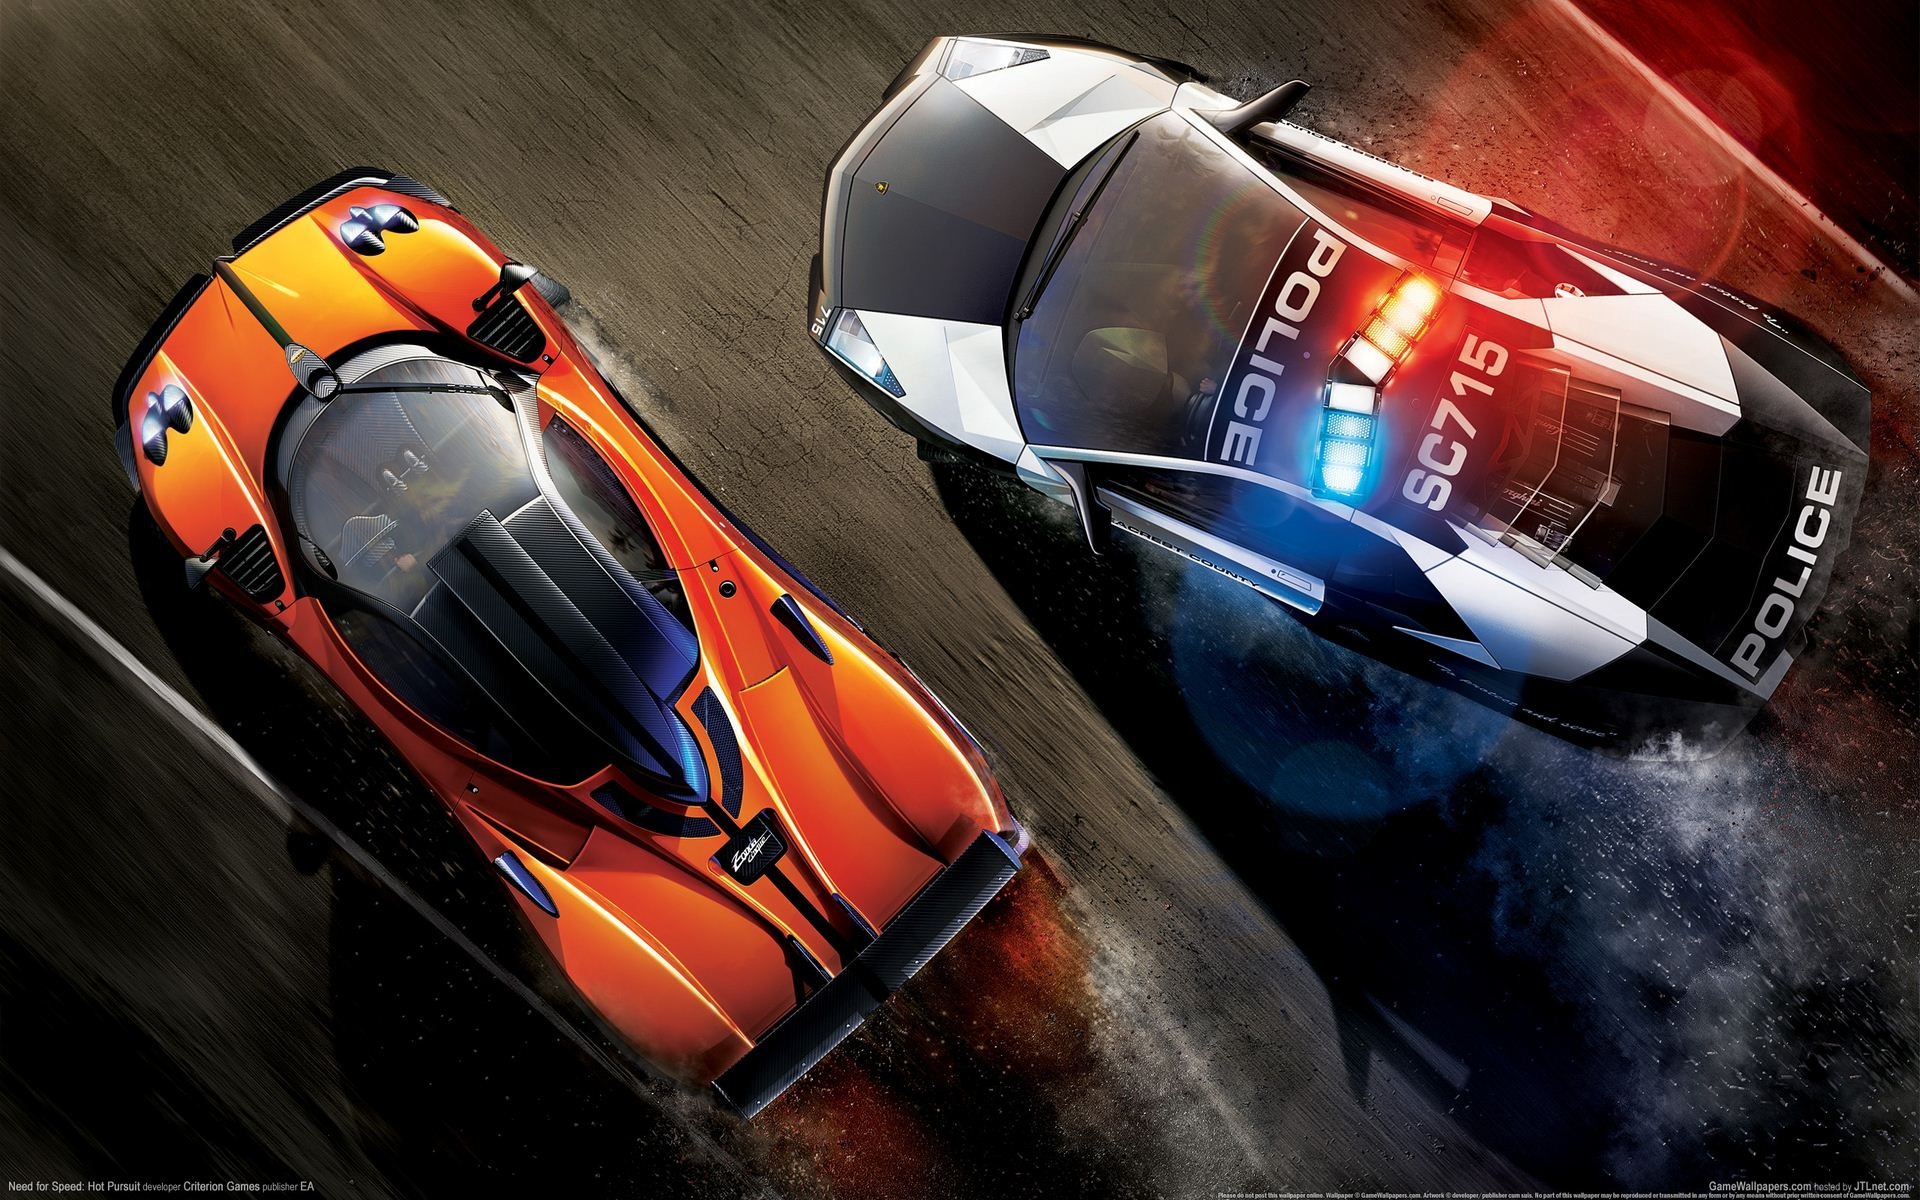 Need for Speed: Hot Pursuit #1 - 1920x1200